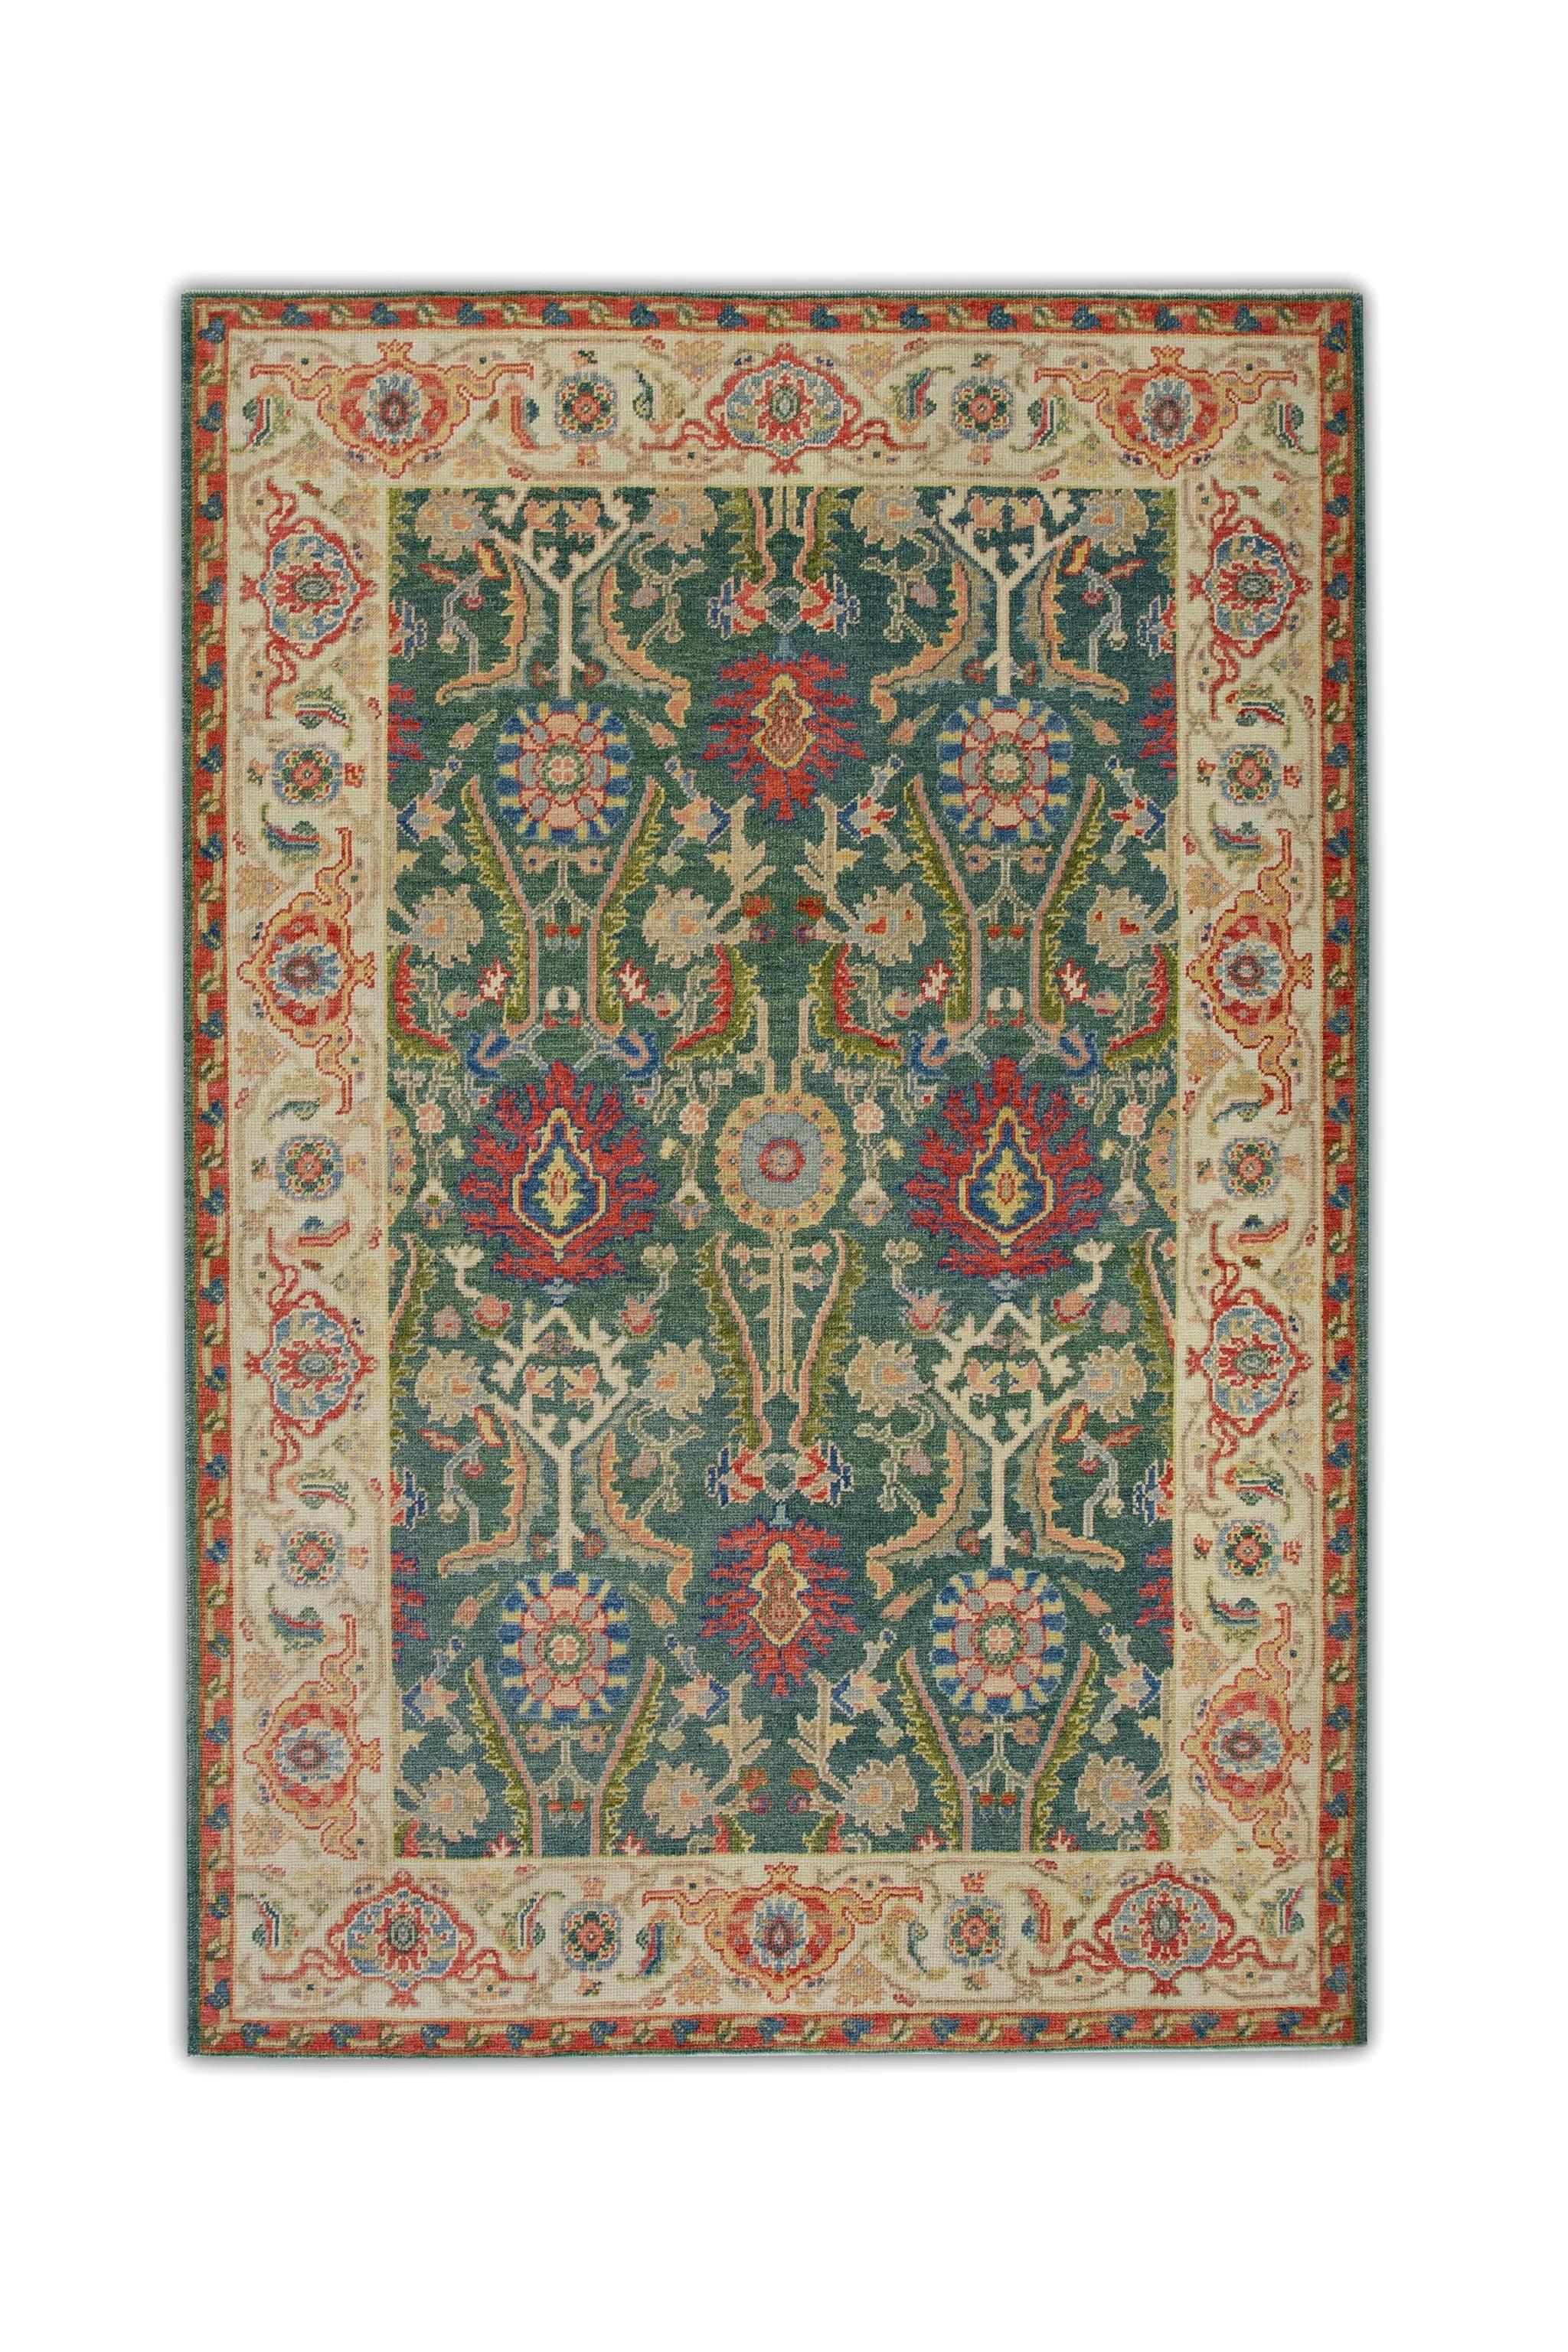 Green & Red Floral Design Handwoven Wool Turkish Finewoven Oushak Rug 4'3 x 6'3 For Sale 1